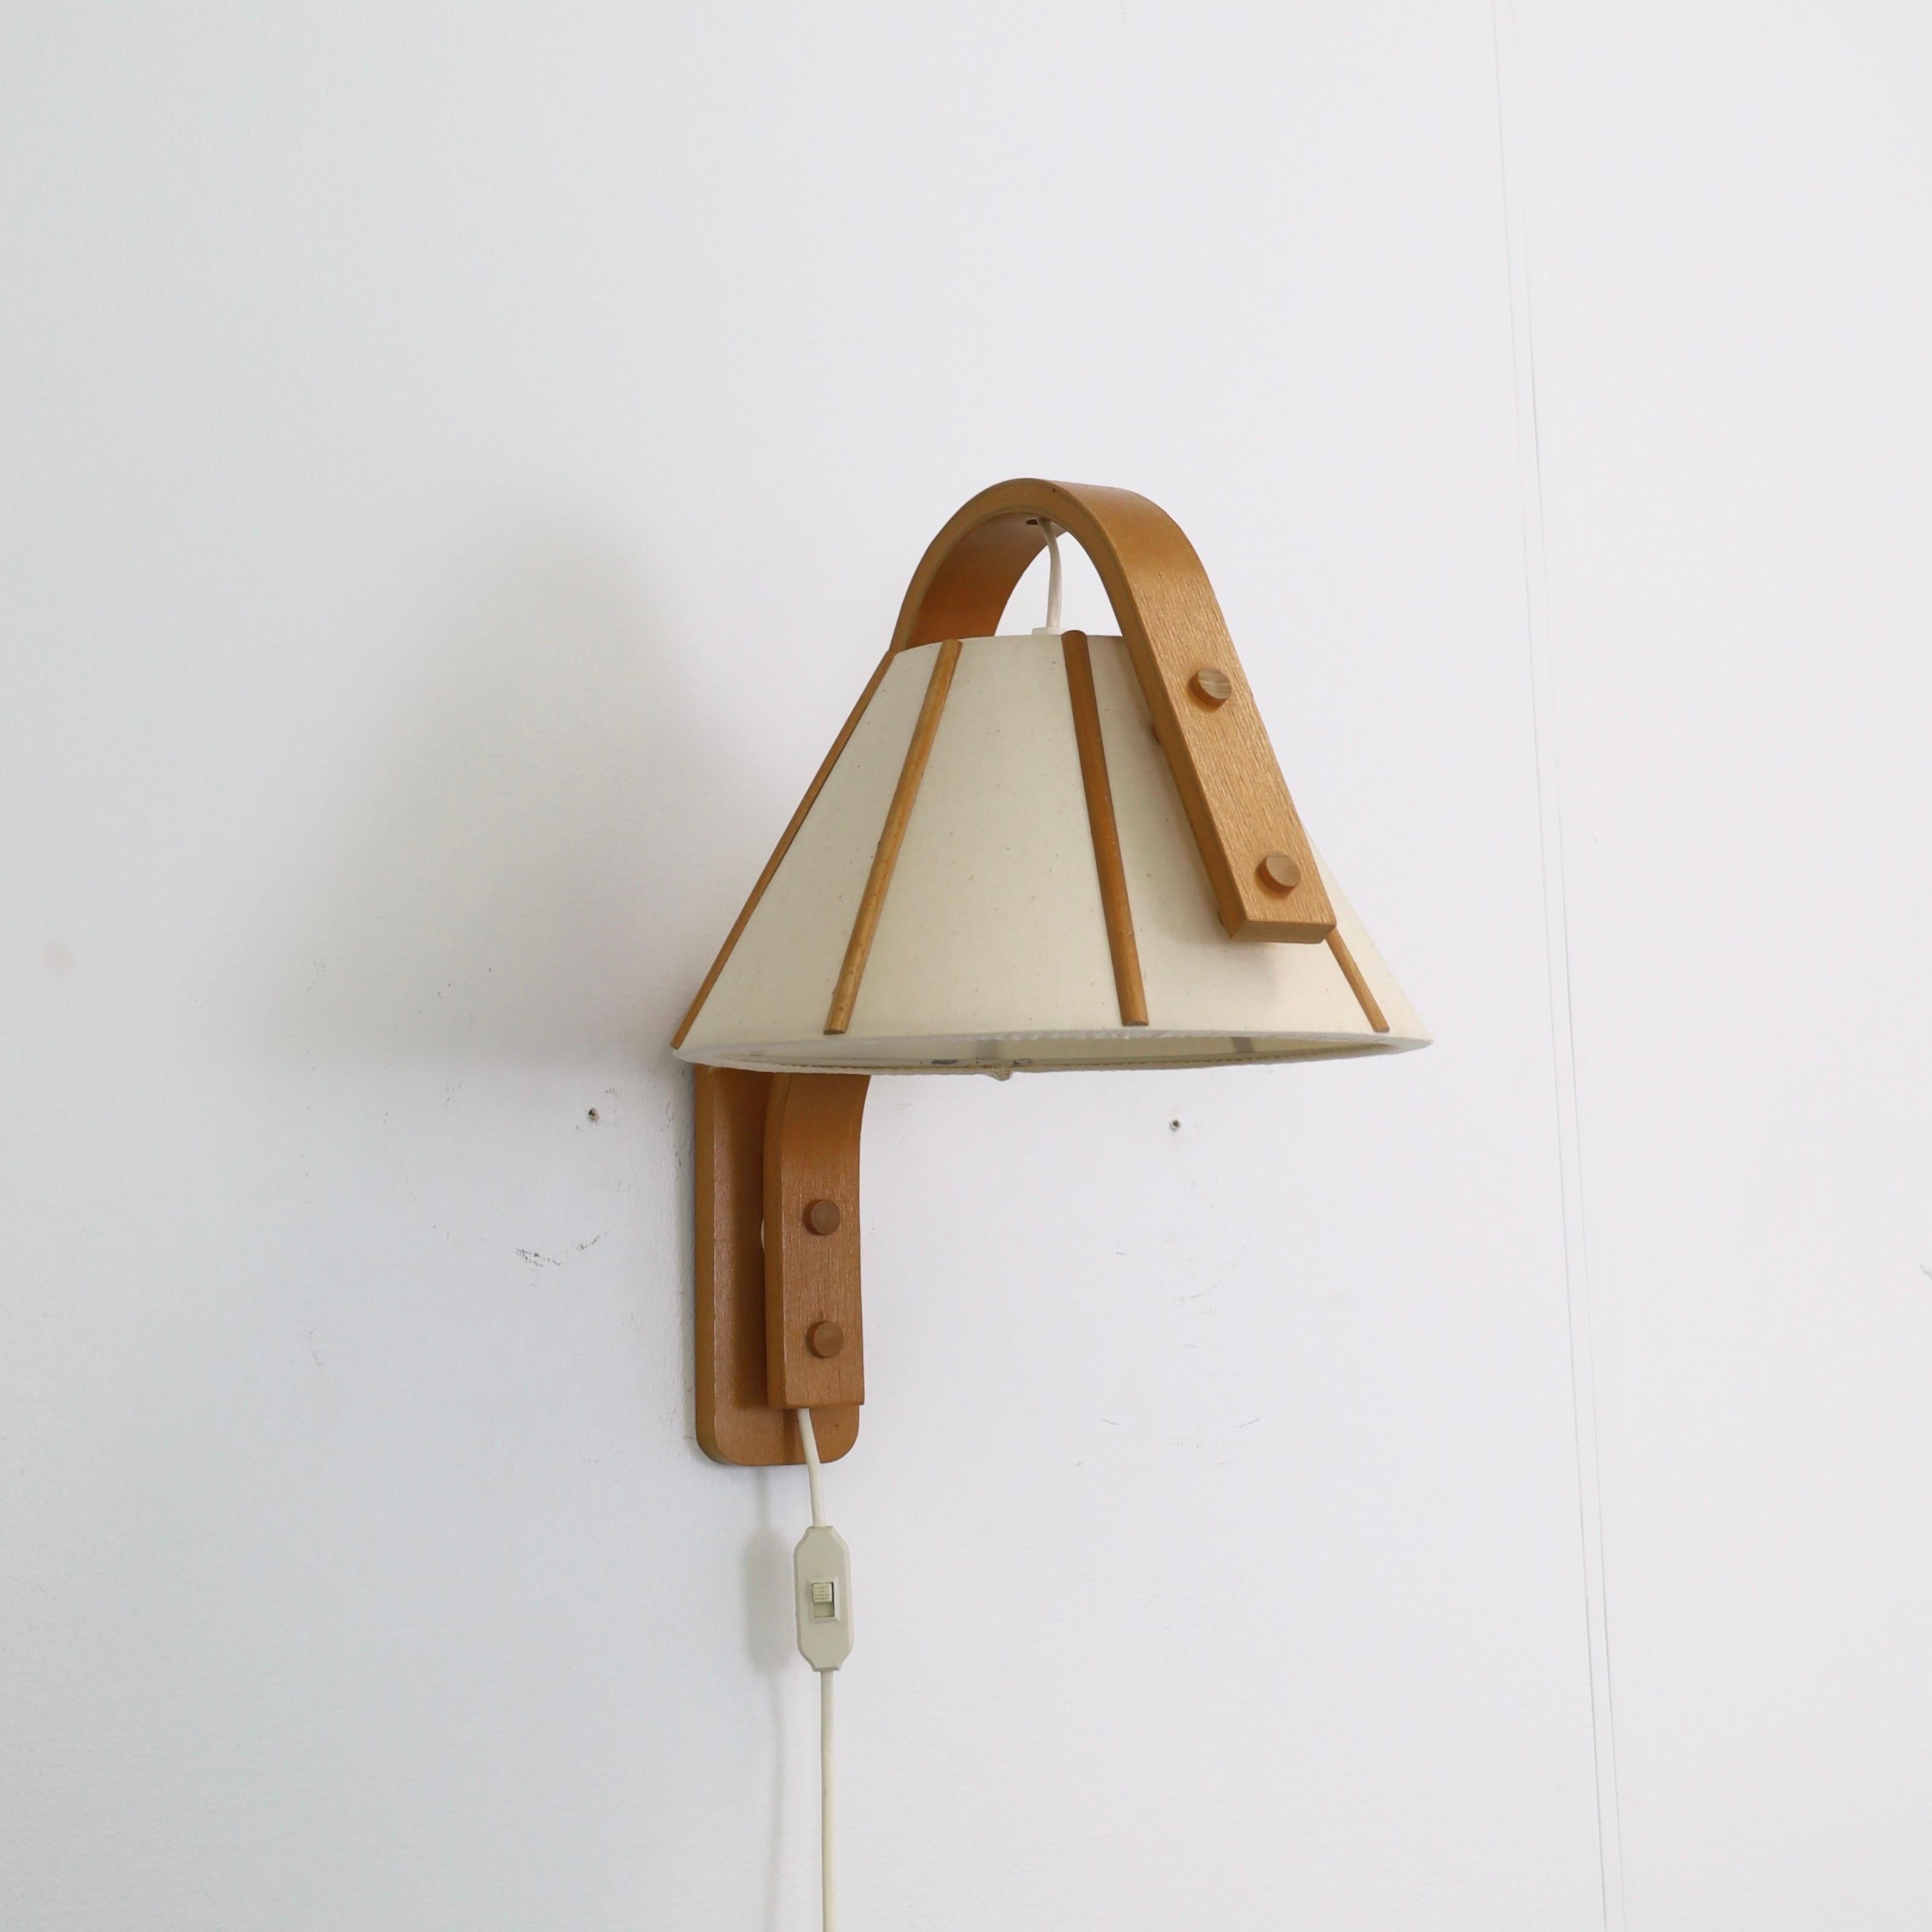 Scandinavian Modern wall lamp in bend Beech wood designed by Jan Wickelgren in the 1970s for Aneta Sweden. A Nordic touch for a beautiful home.

* A bend beech veneer wall lamp with a light cream-coloured shades in canvas
* Designer: Jan